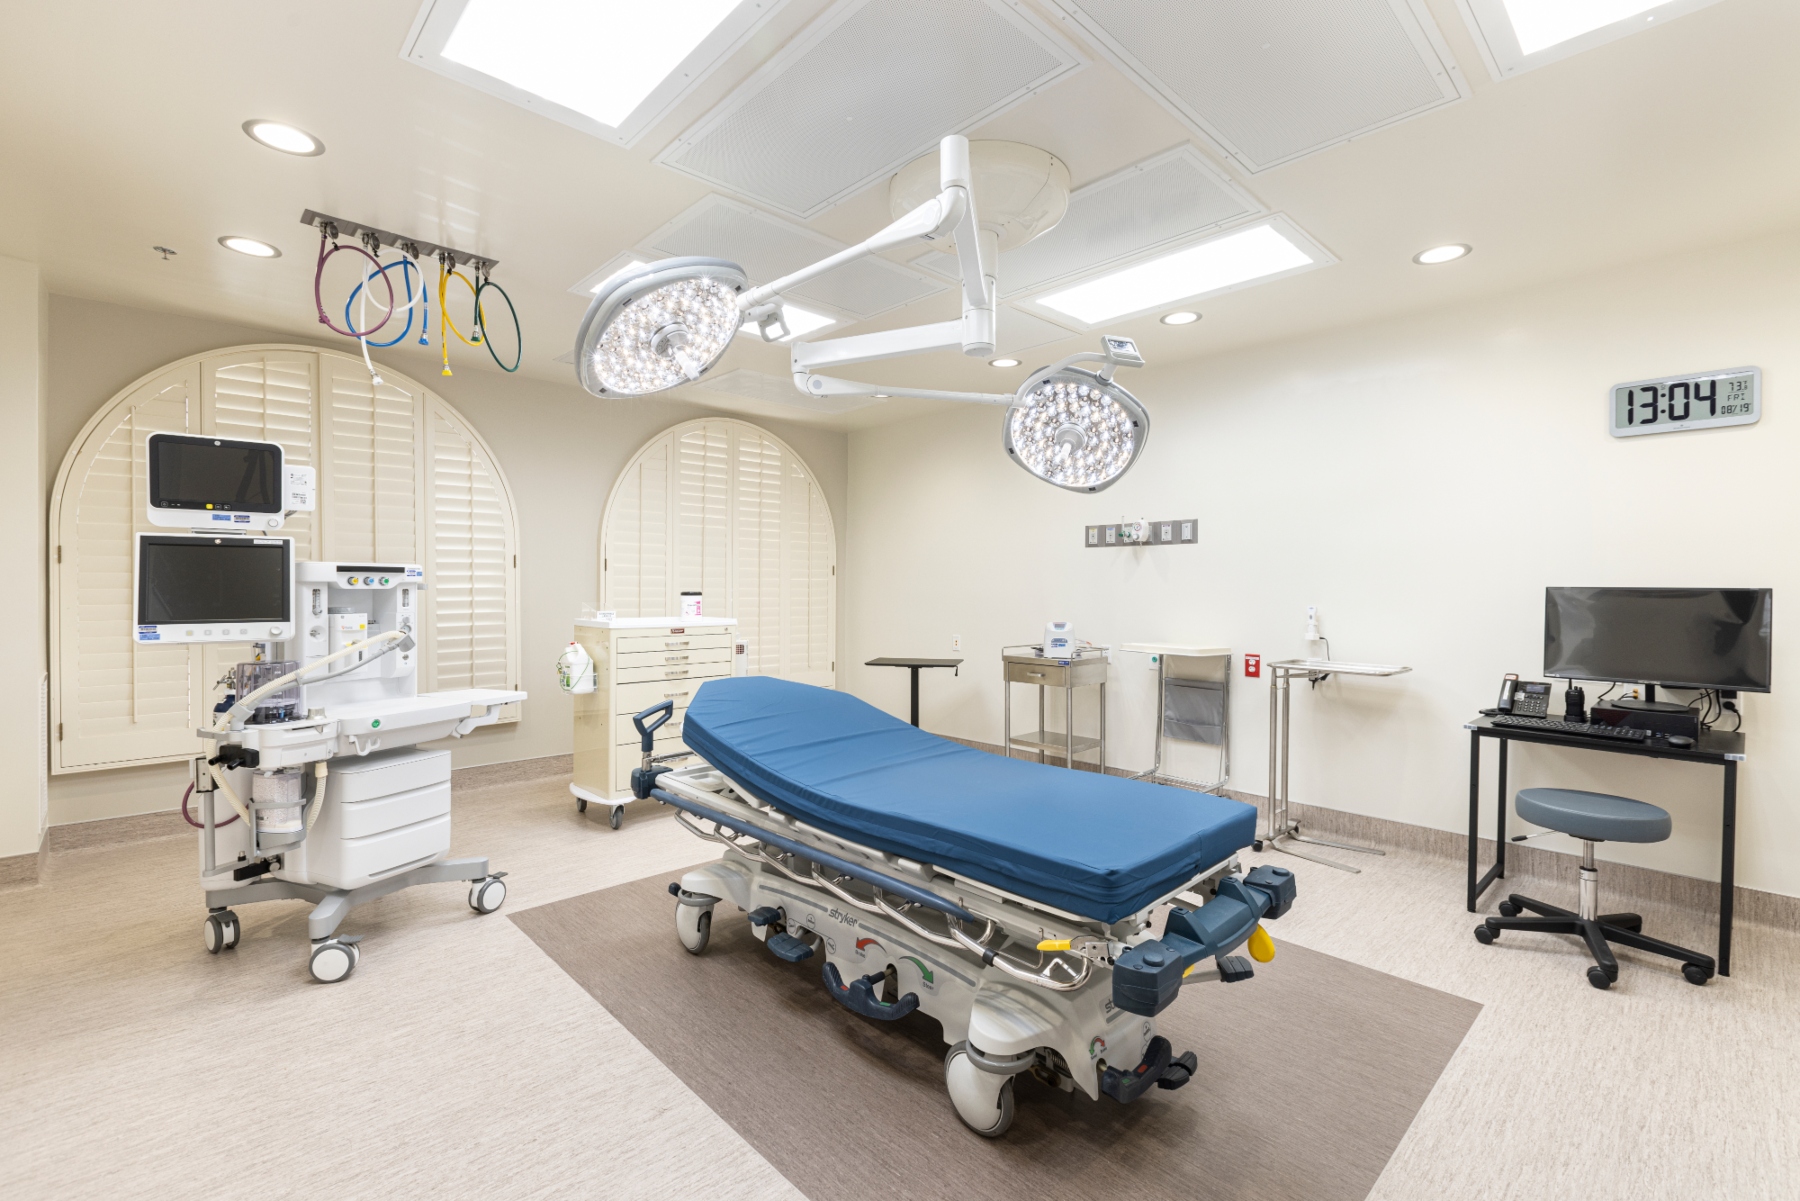 Operating room at Mountain West Surgical Center in Reno